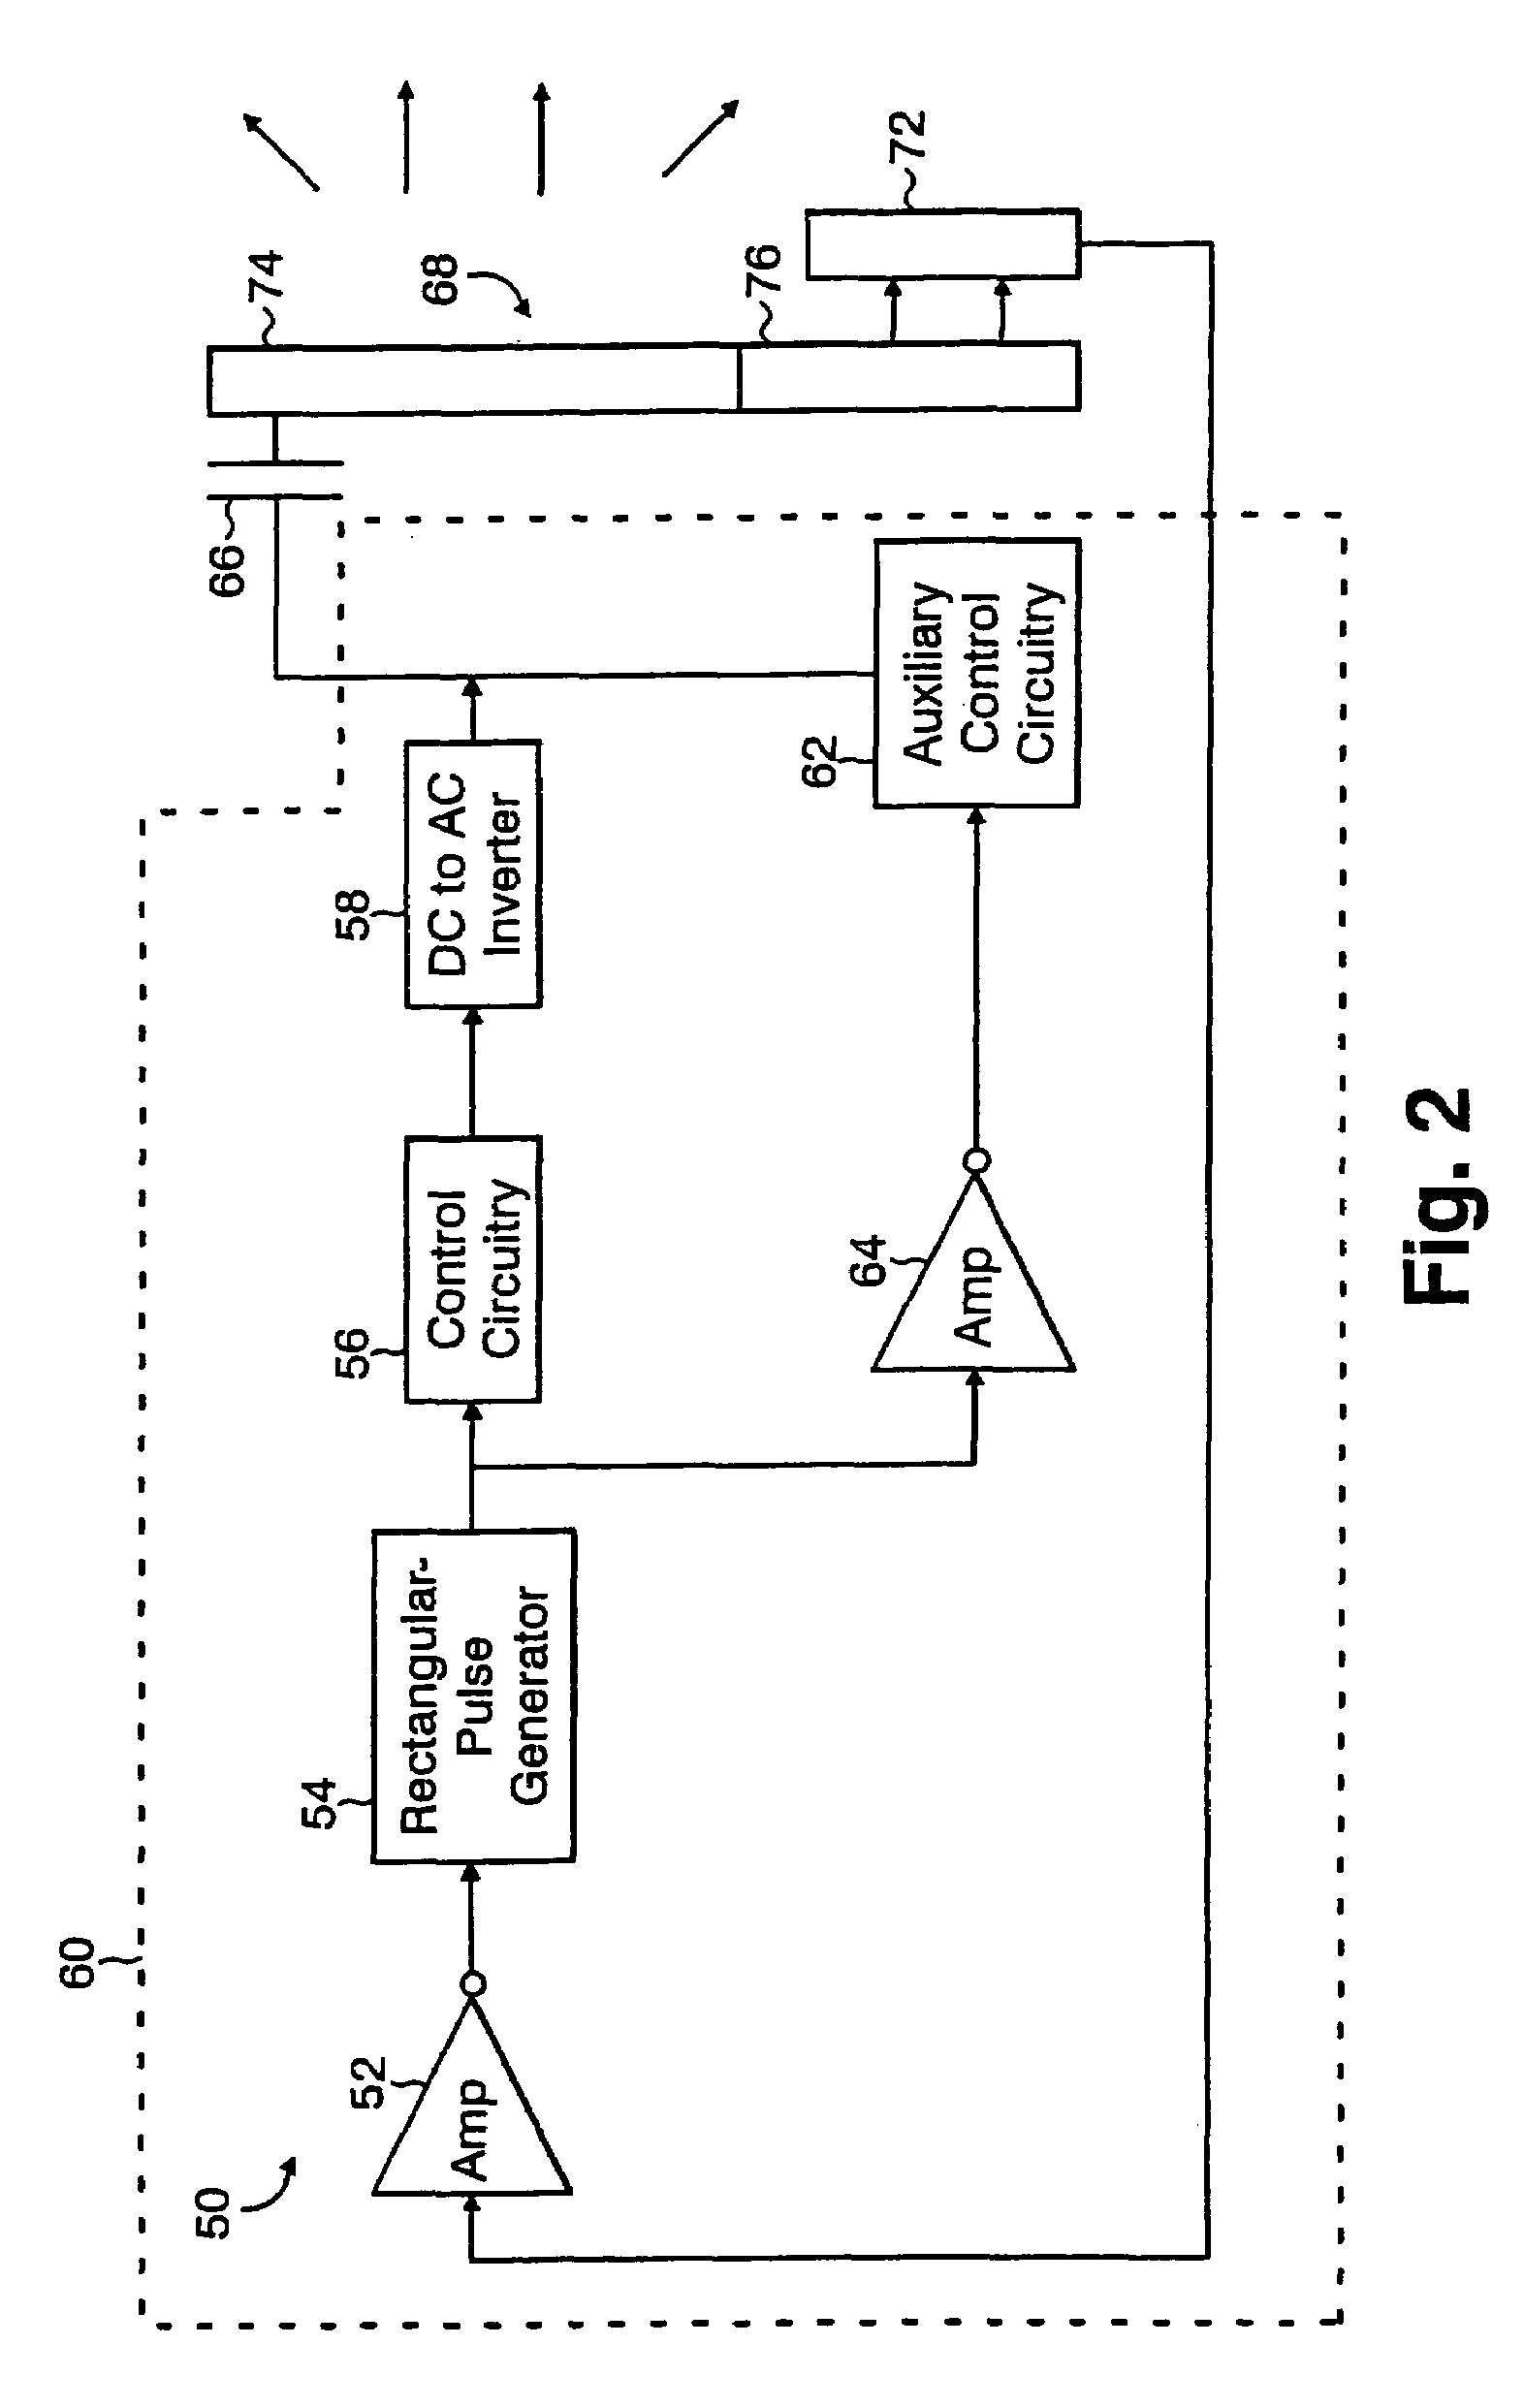 Electroluminescent device including a programmable pattern generator